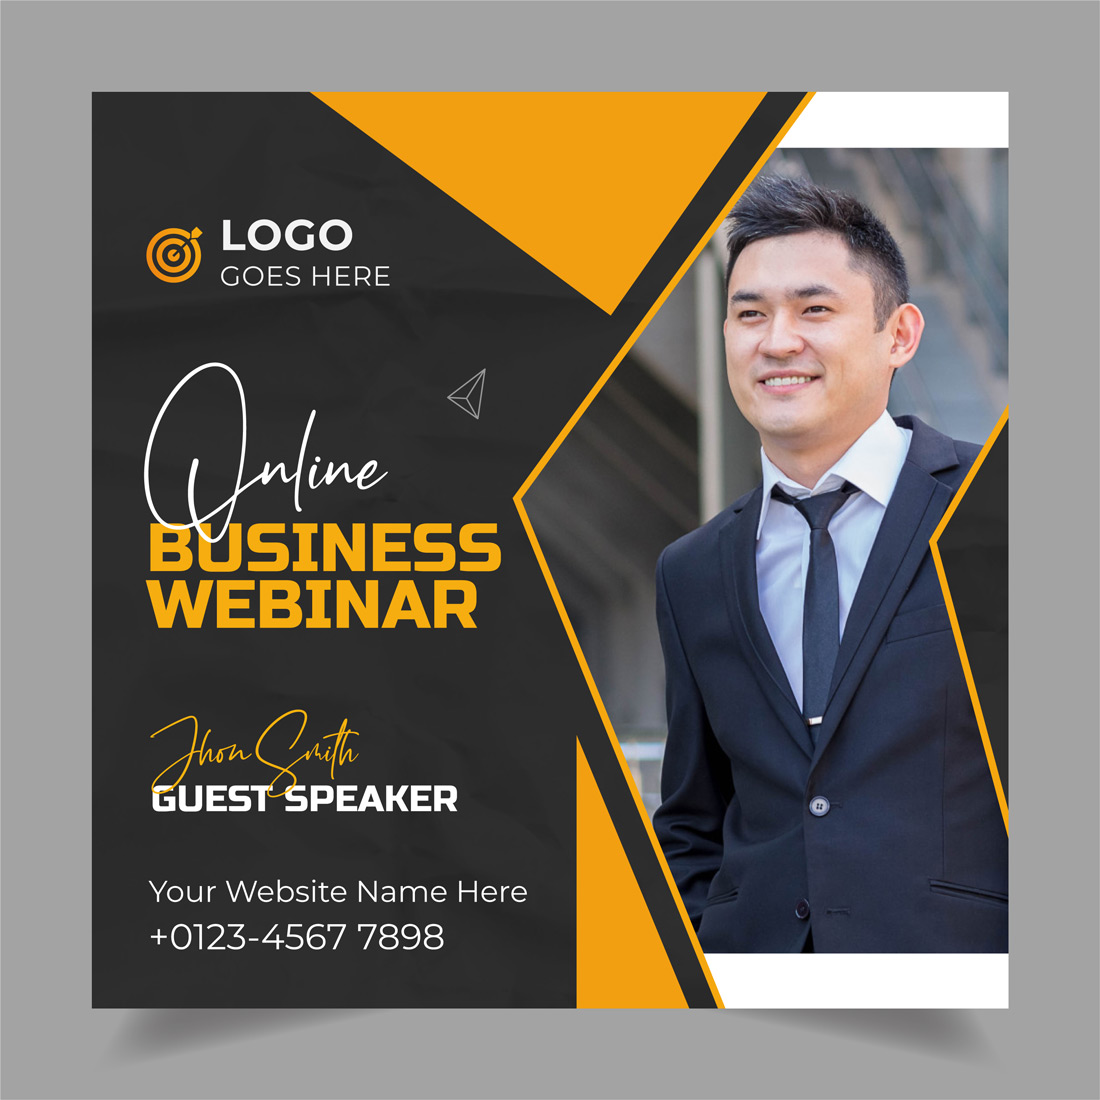 Black and yellow business card with a man in a suit.